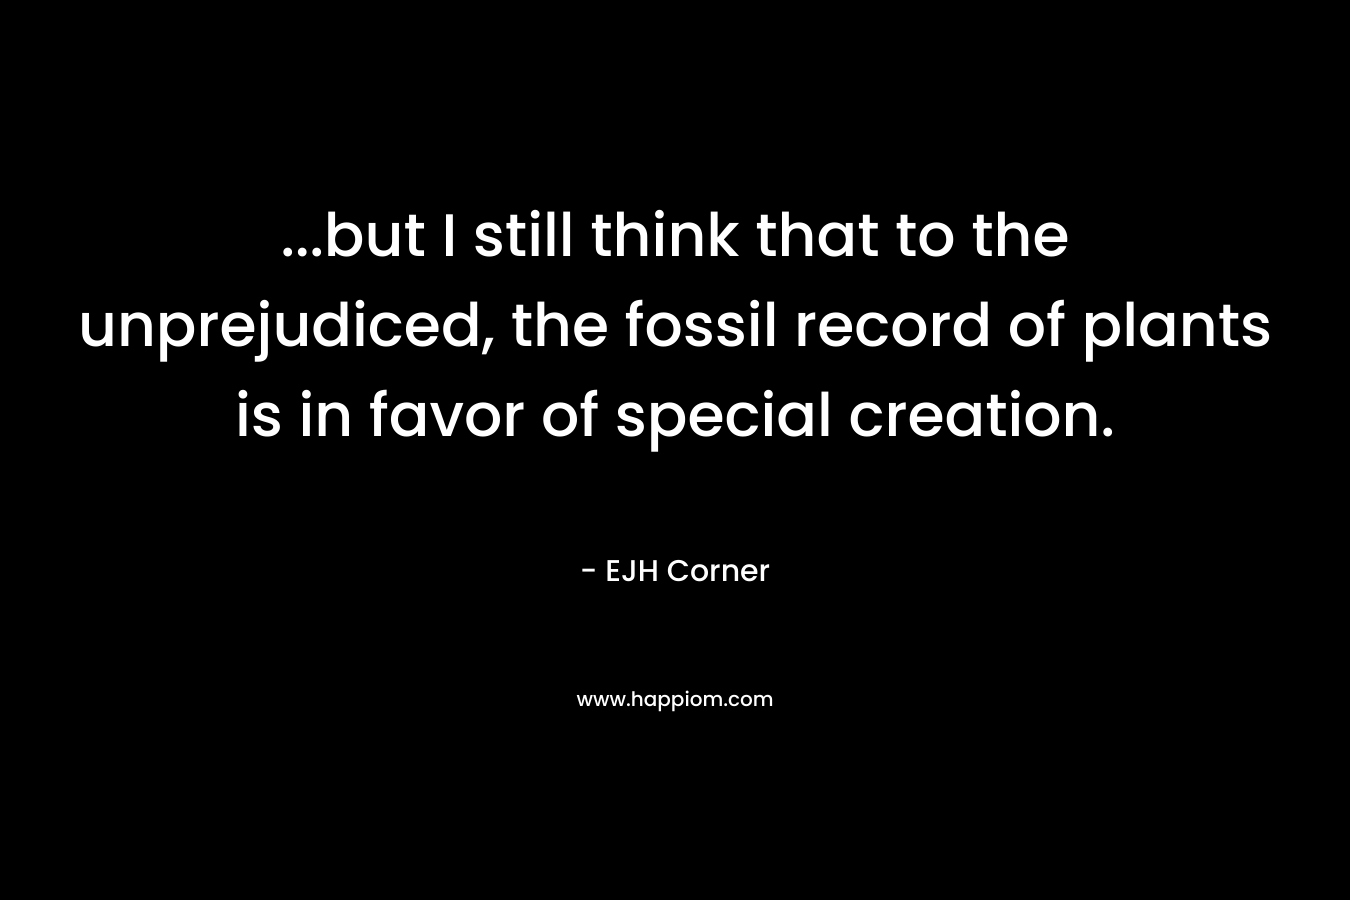 ...but I still think that to the unprejudiced, the fossil record of plants is in favor of special creation.